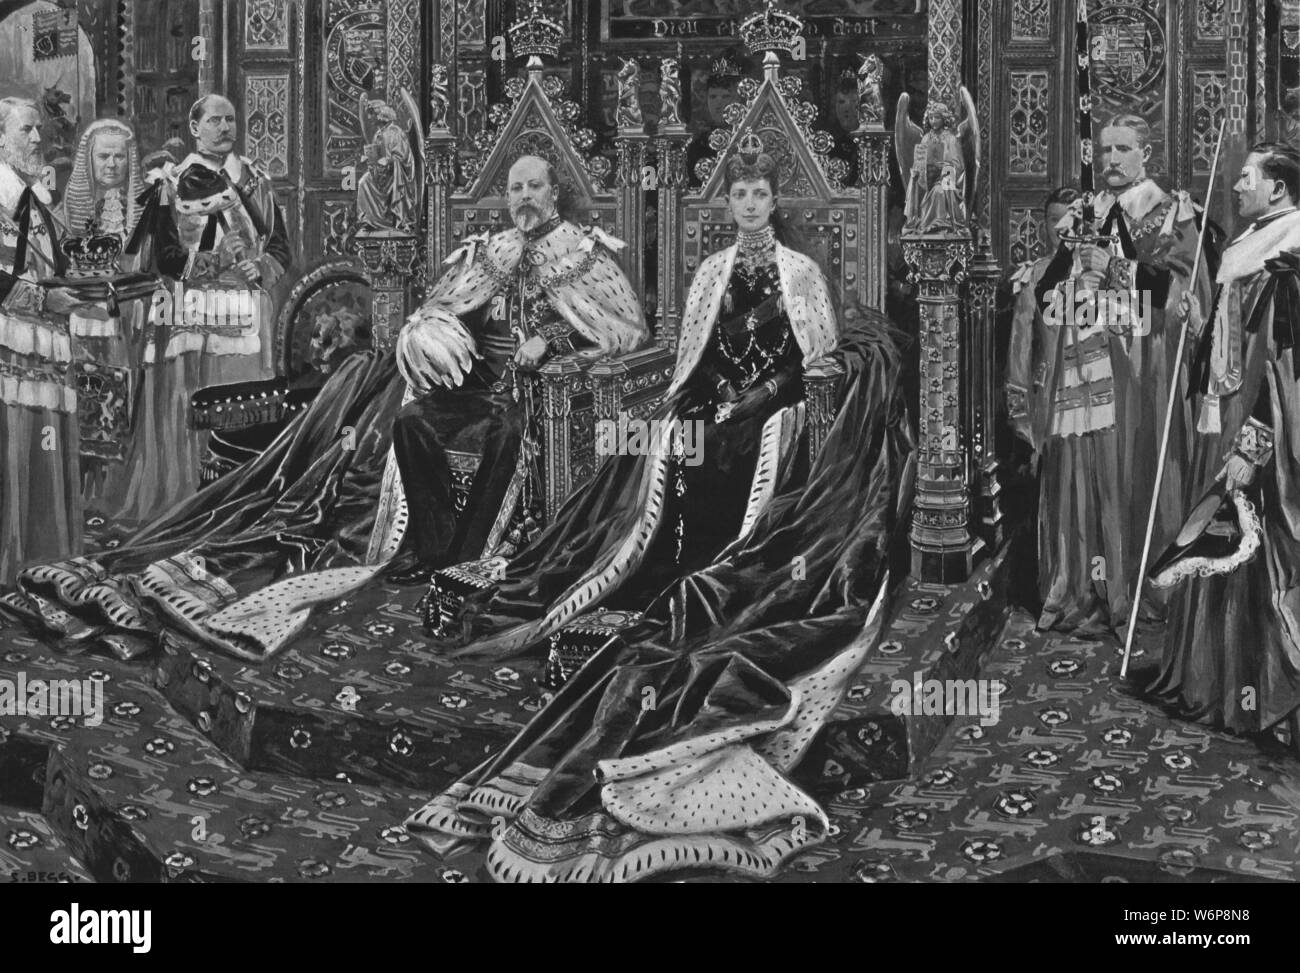 'King Edward VII. And Queen Alexandra at the Opening of His Majesty's First Parliament, February 14, 1901'. Edward VII (1841-1910) and Queen Alexandra (1844-1925) in ceremonial ermine, presiding over the state opening of parliament at the Palace of Westminster, London. From &quot;The Illustrated London News Record of the Glorious Reign of Queen Victoria 1837-1901: The Life and Accession of King Edward VII. and the Life of Queen Alexandra&quot;. [London, 1901] Stock Photo